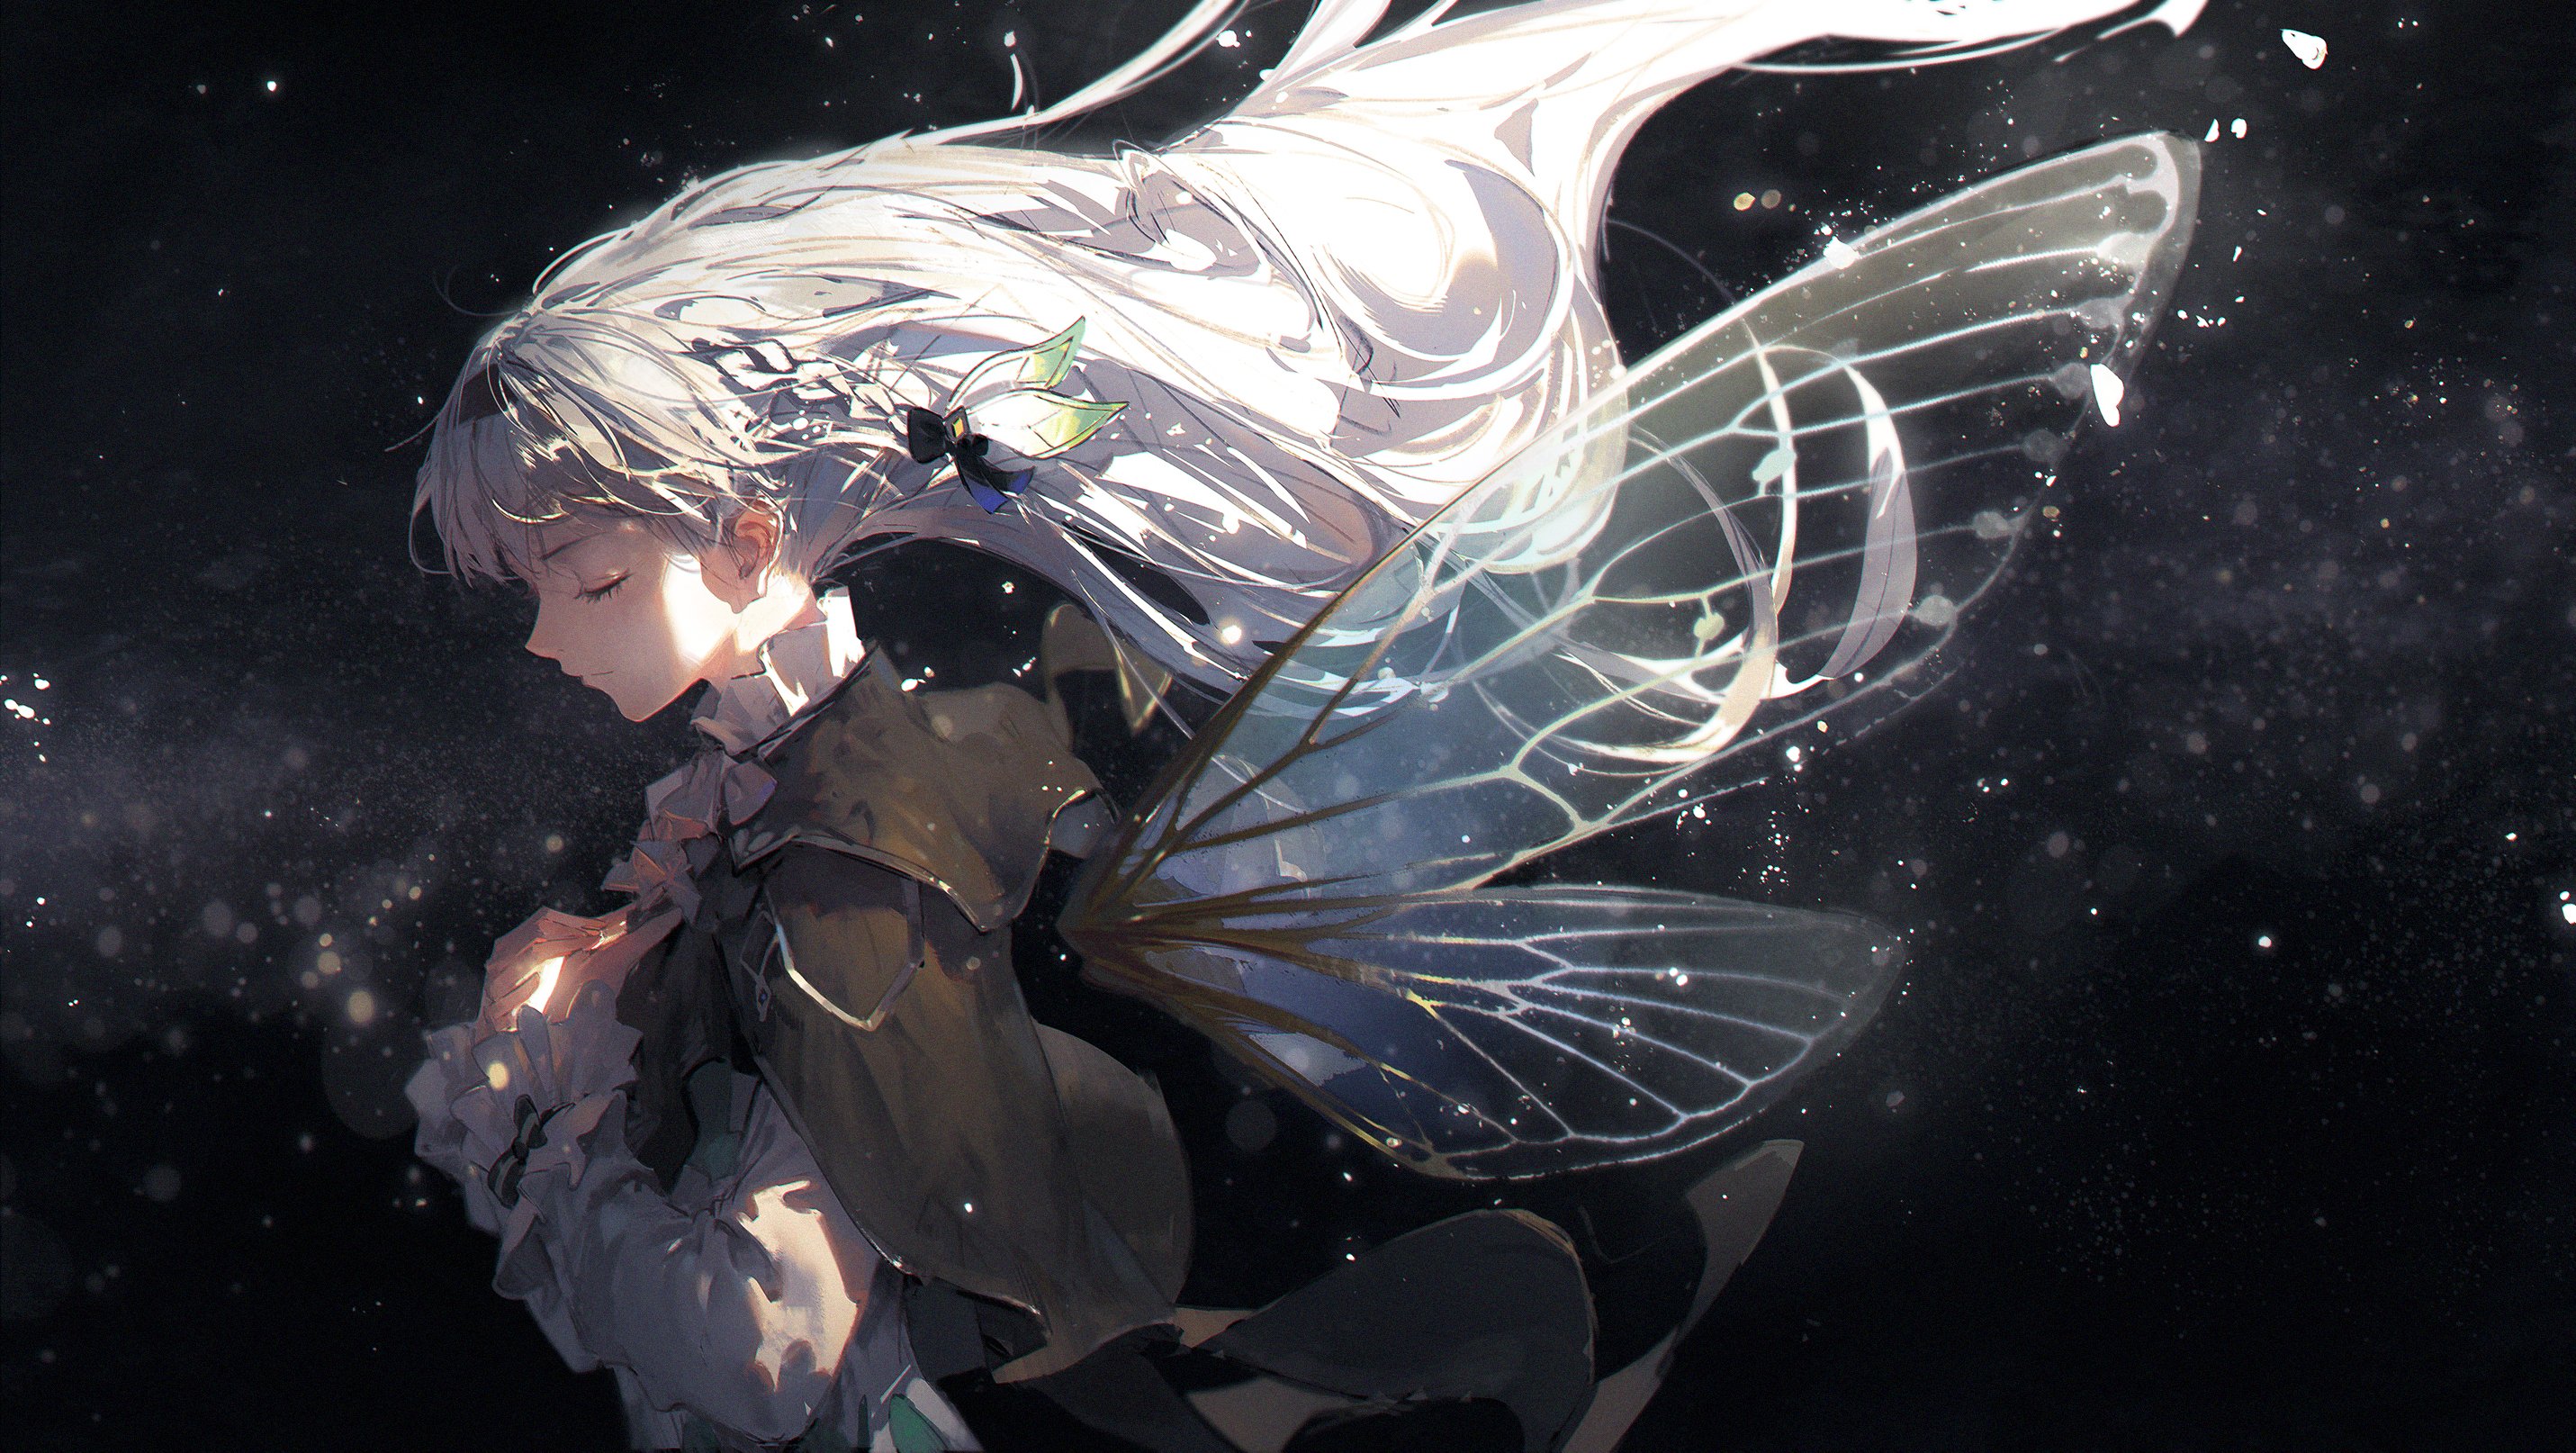 Anime 2862x1614 anime girls white hair butterfly wings praying closed eyes space